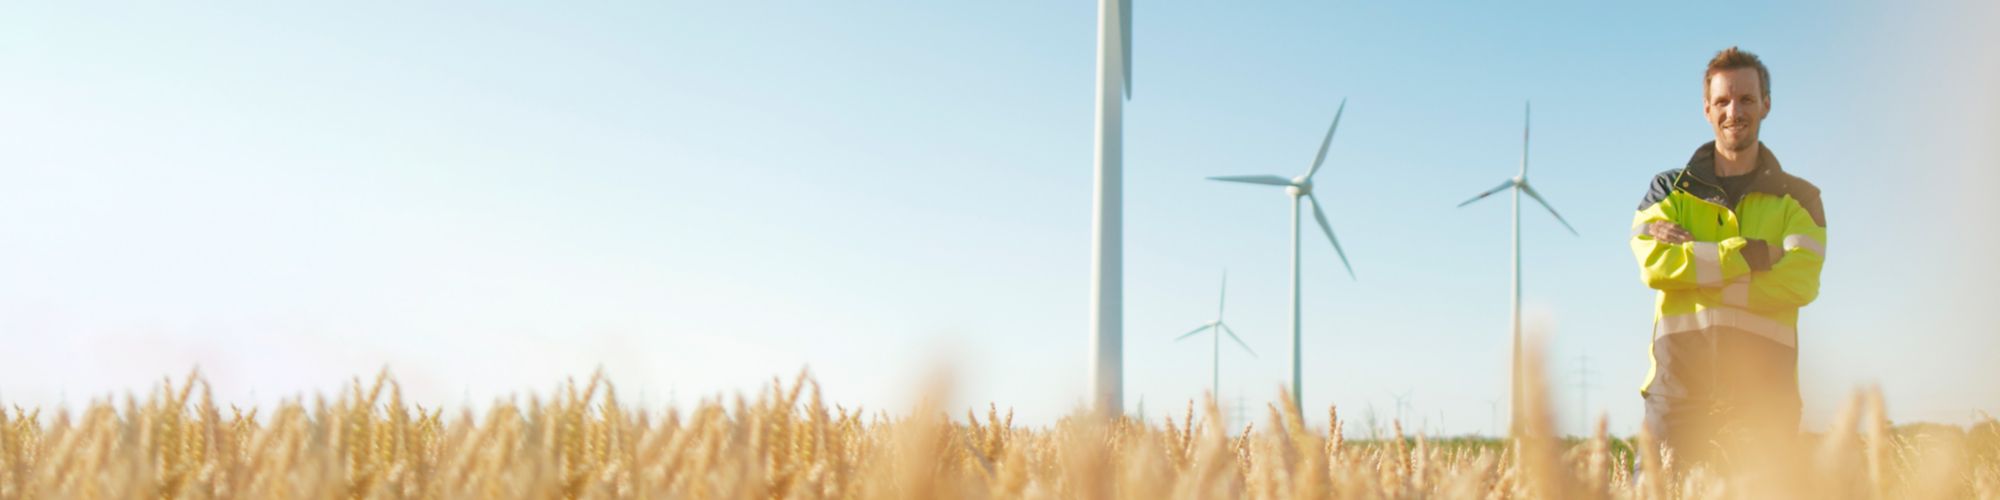 Smiling engineer standing in a field at a wind farm